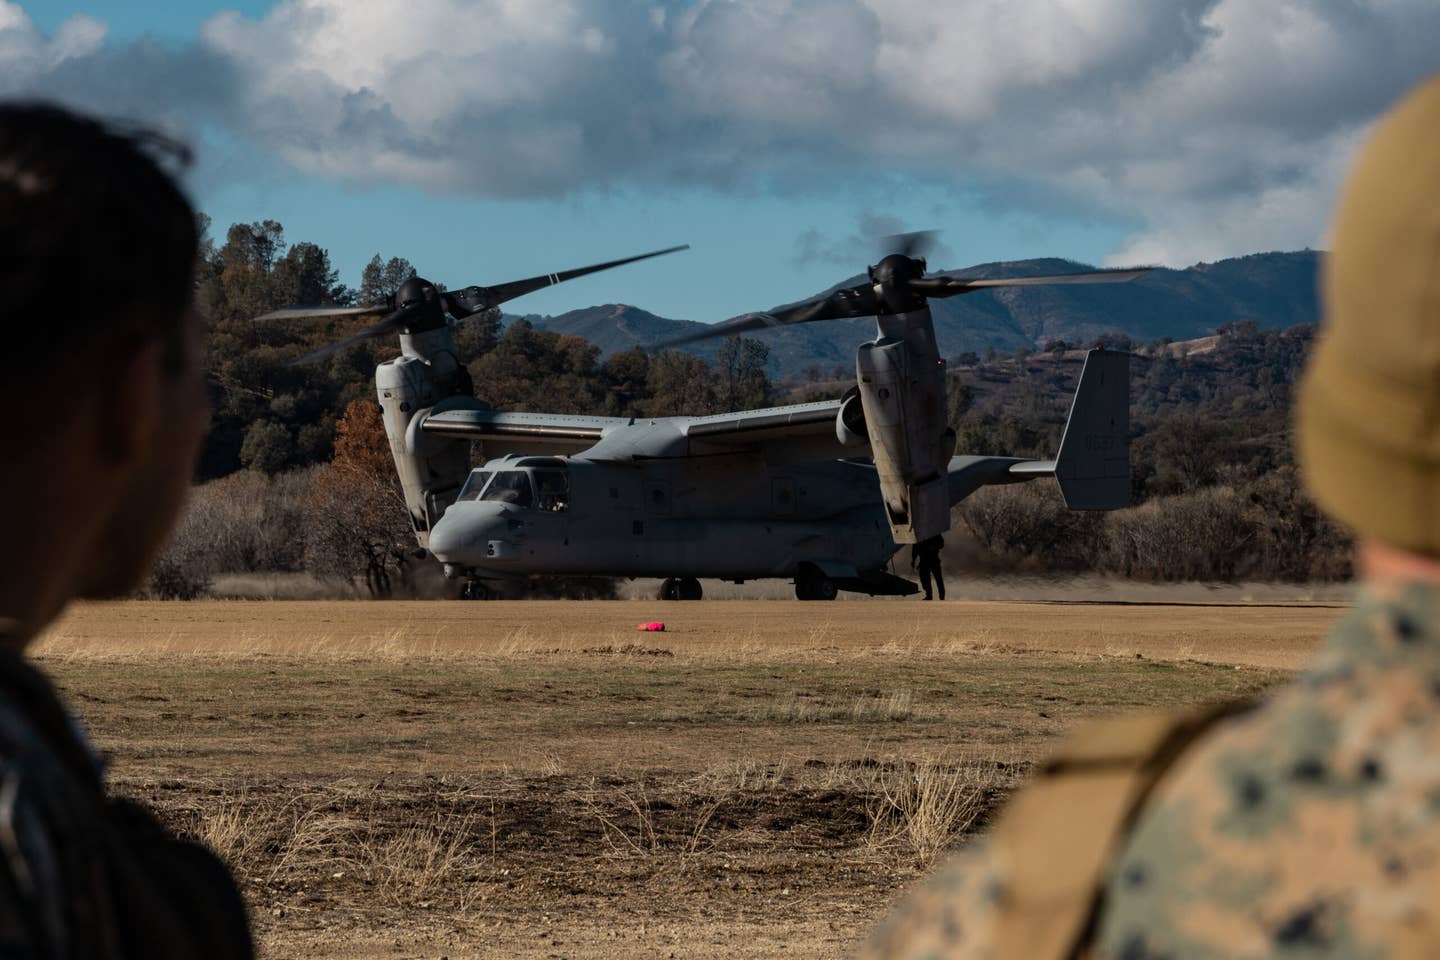 U.S. Marines with Marine Aircraft Group 39, 3rd Marine Aircraft Wing (MAW), guide the arrival of a MV-22B Osprey over radio during flight operations as part of Steel Knight 23 on Fort Hunter Liggett, Dec. 7, 2022. Exercise Steel Knight 23 provides 3d MAW an opportunity to refine Wing-level warfighting in support of I Marine Expeditionary Force and fleet maneuver. (U.S. Marine Corps photo by Lance Cpl. Shannon Gibson)